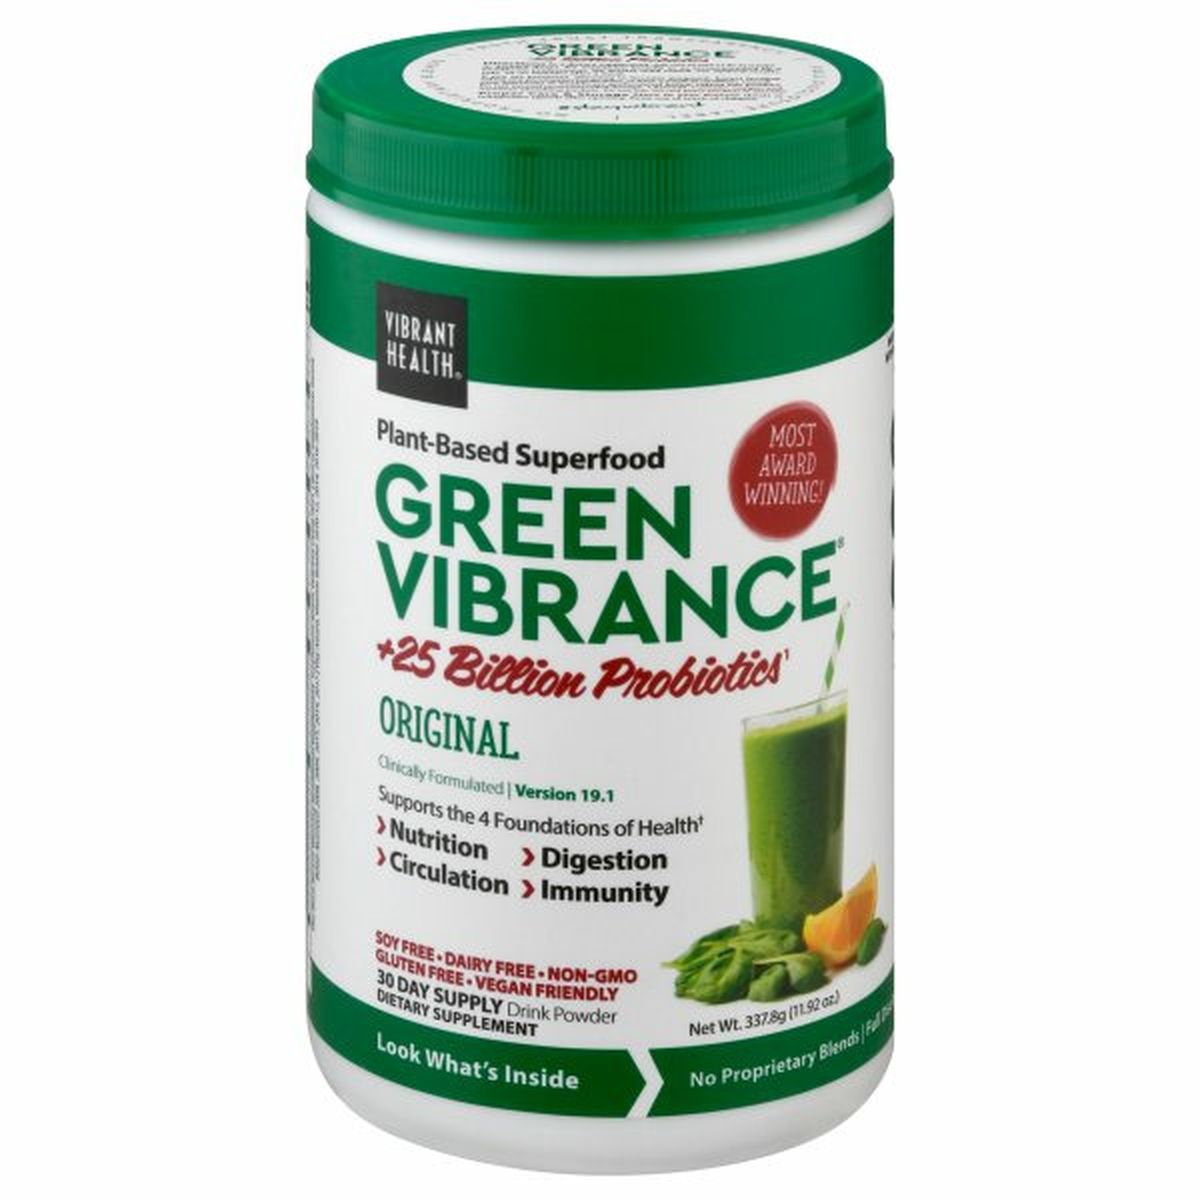 Calories in Vibrant Health Green Vibrance Drink Powder, Plant-Based Superfood, Original